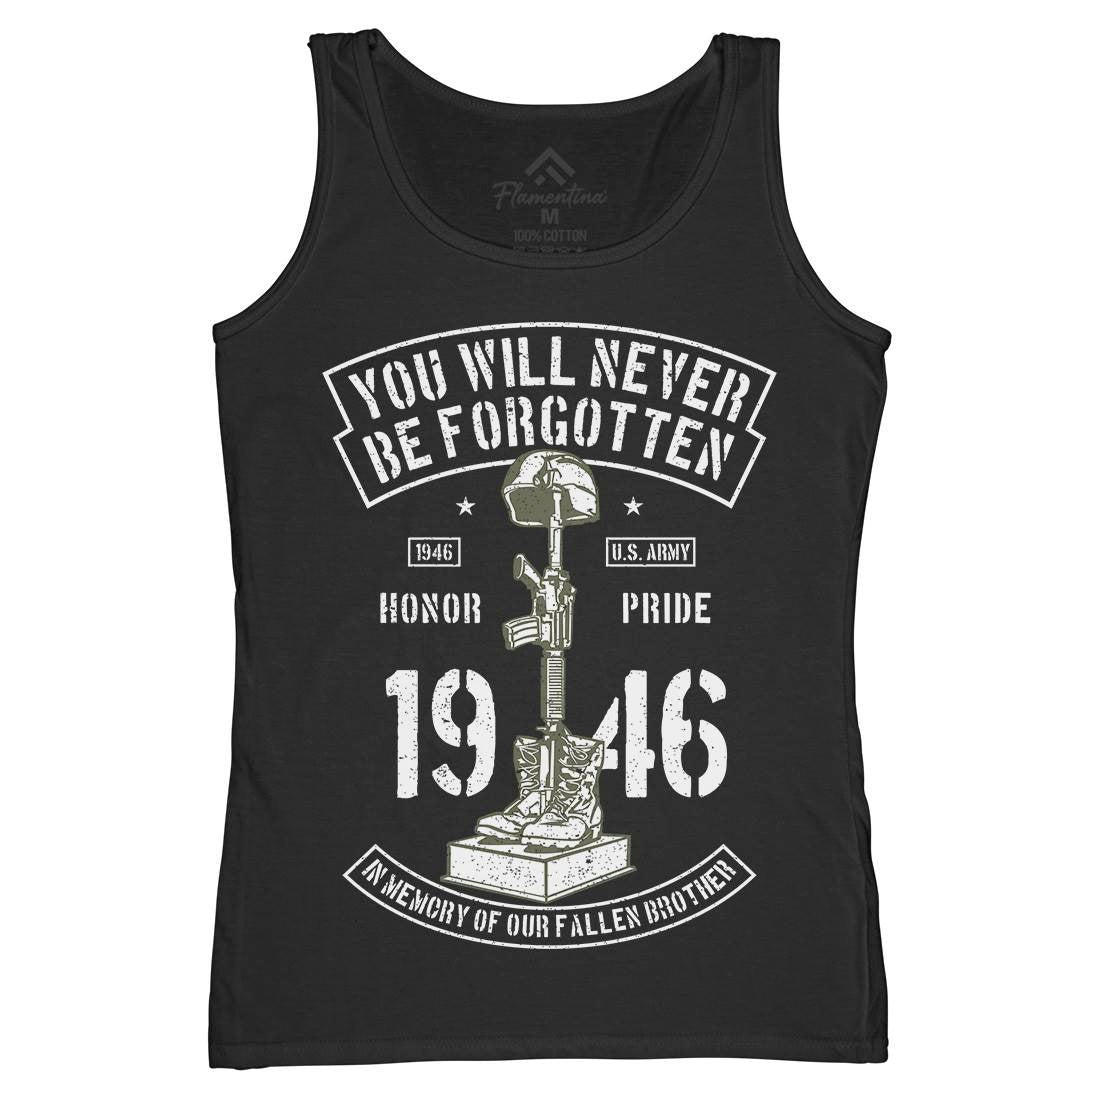 You Will Never Be Forgotten Womens Organic Tank Top Vest Army A800